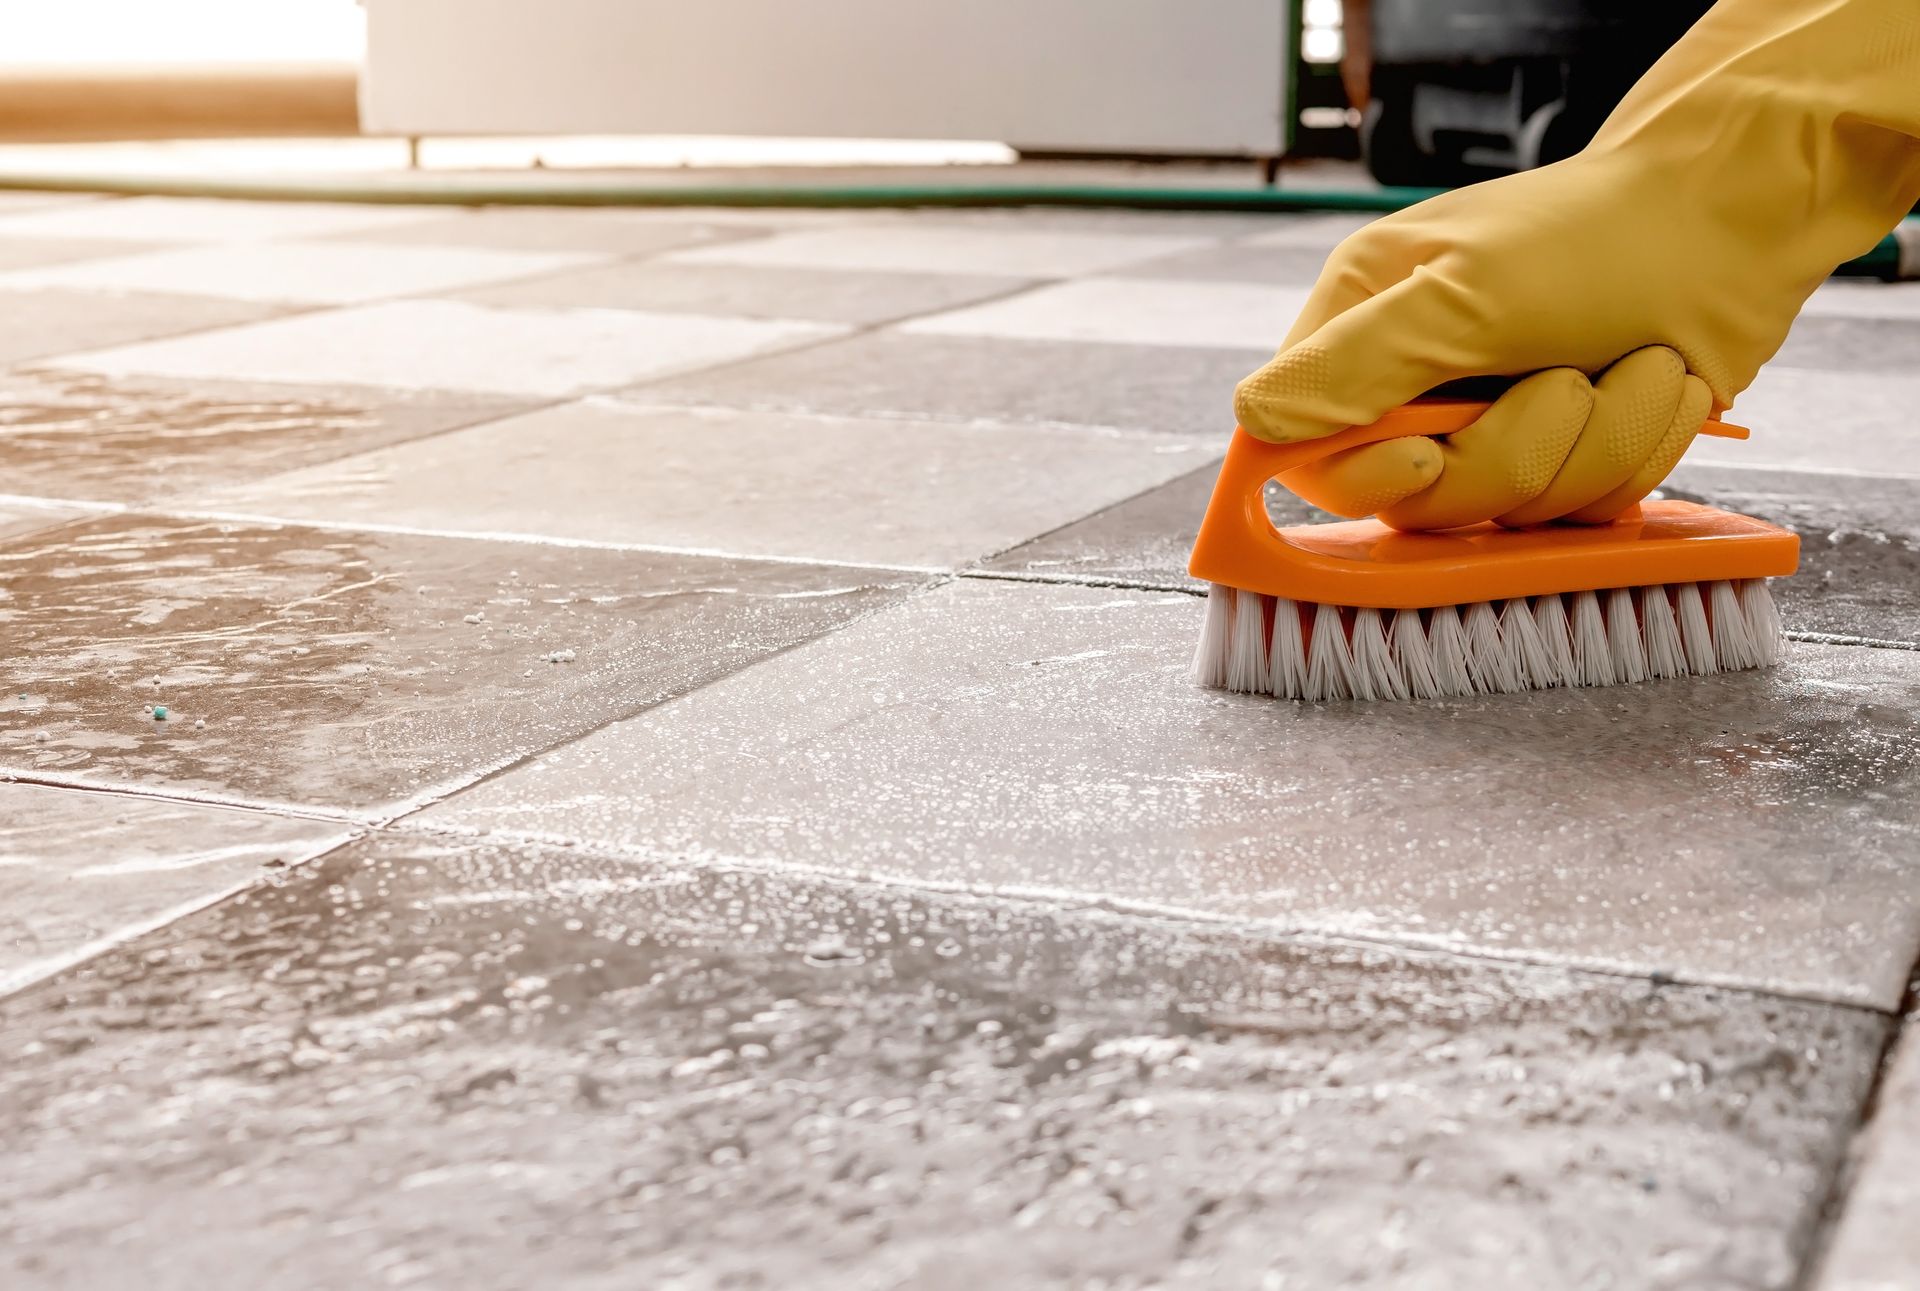 Tile Cleaning Services in Murfreesboro, TN